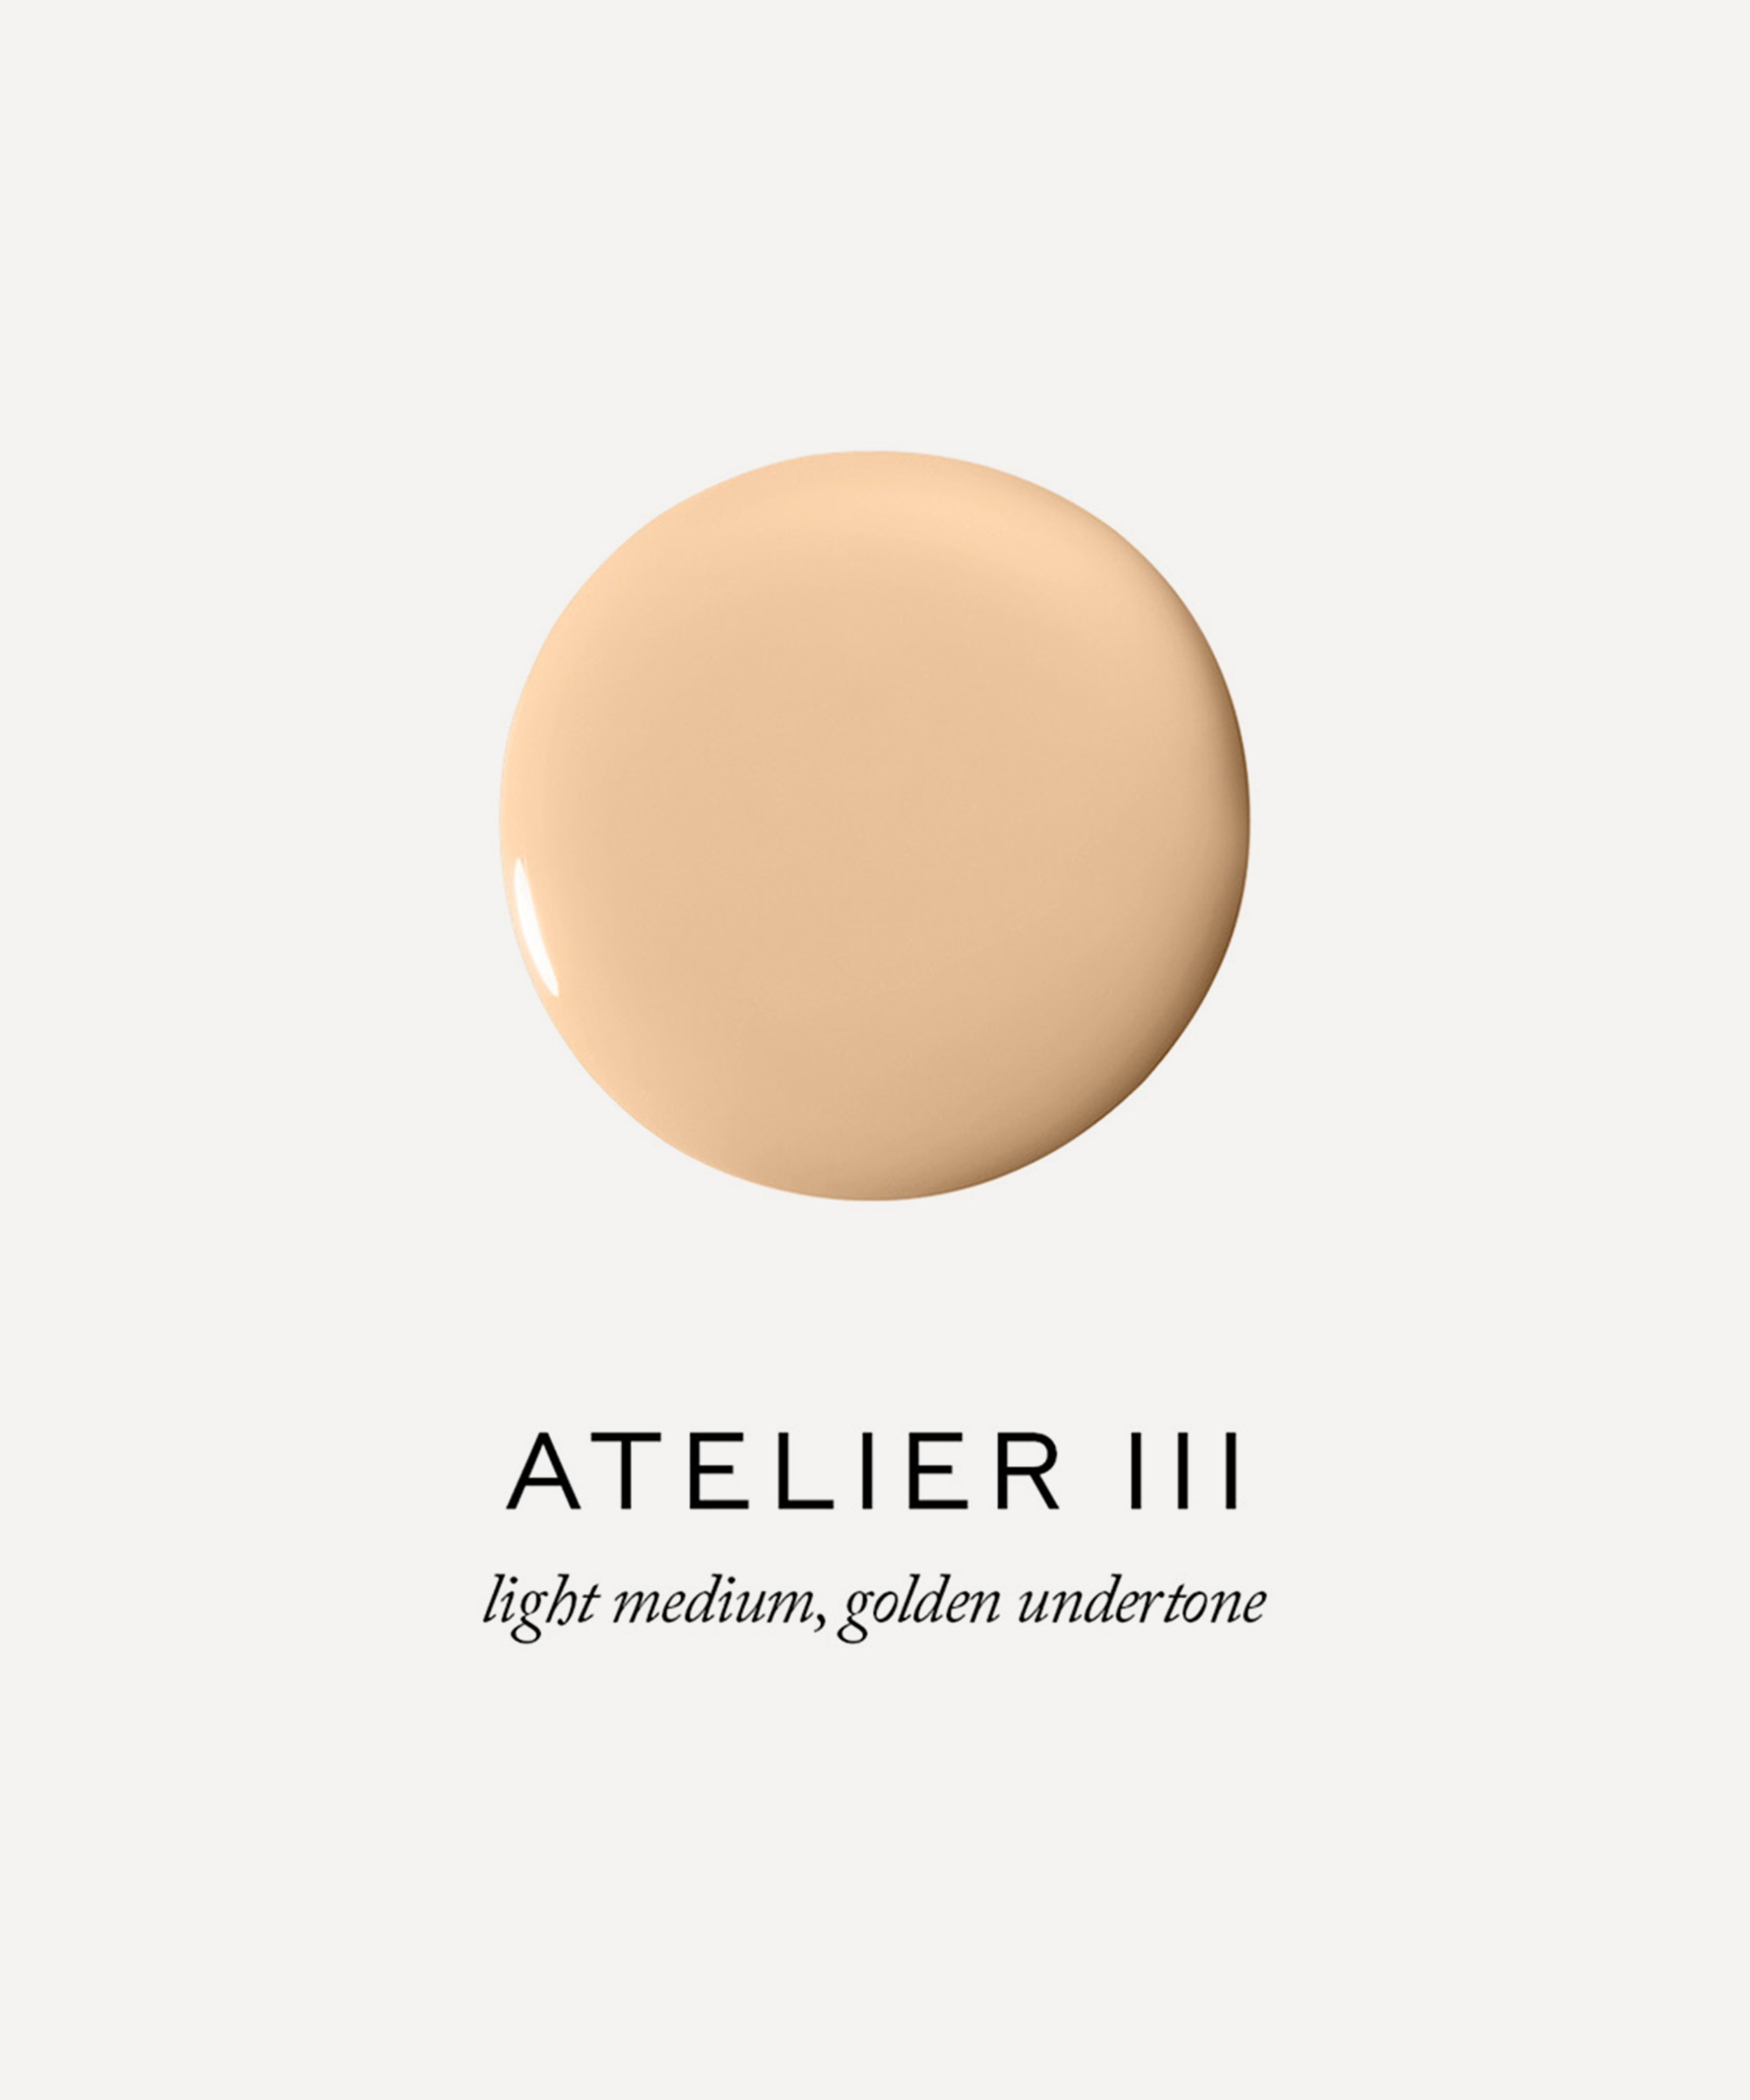 Review of the Westman Atelier Vital Skincare Complexion Drops - World